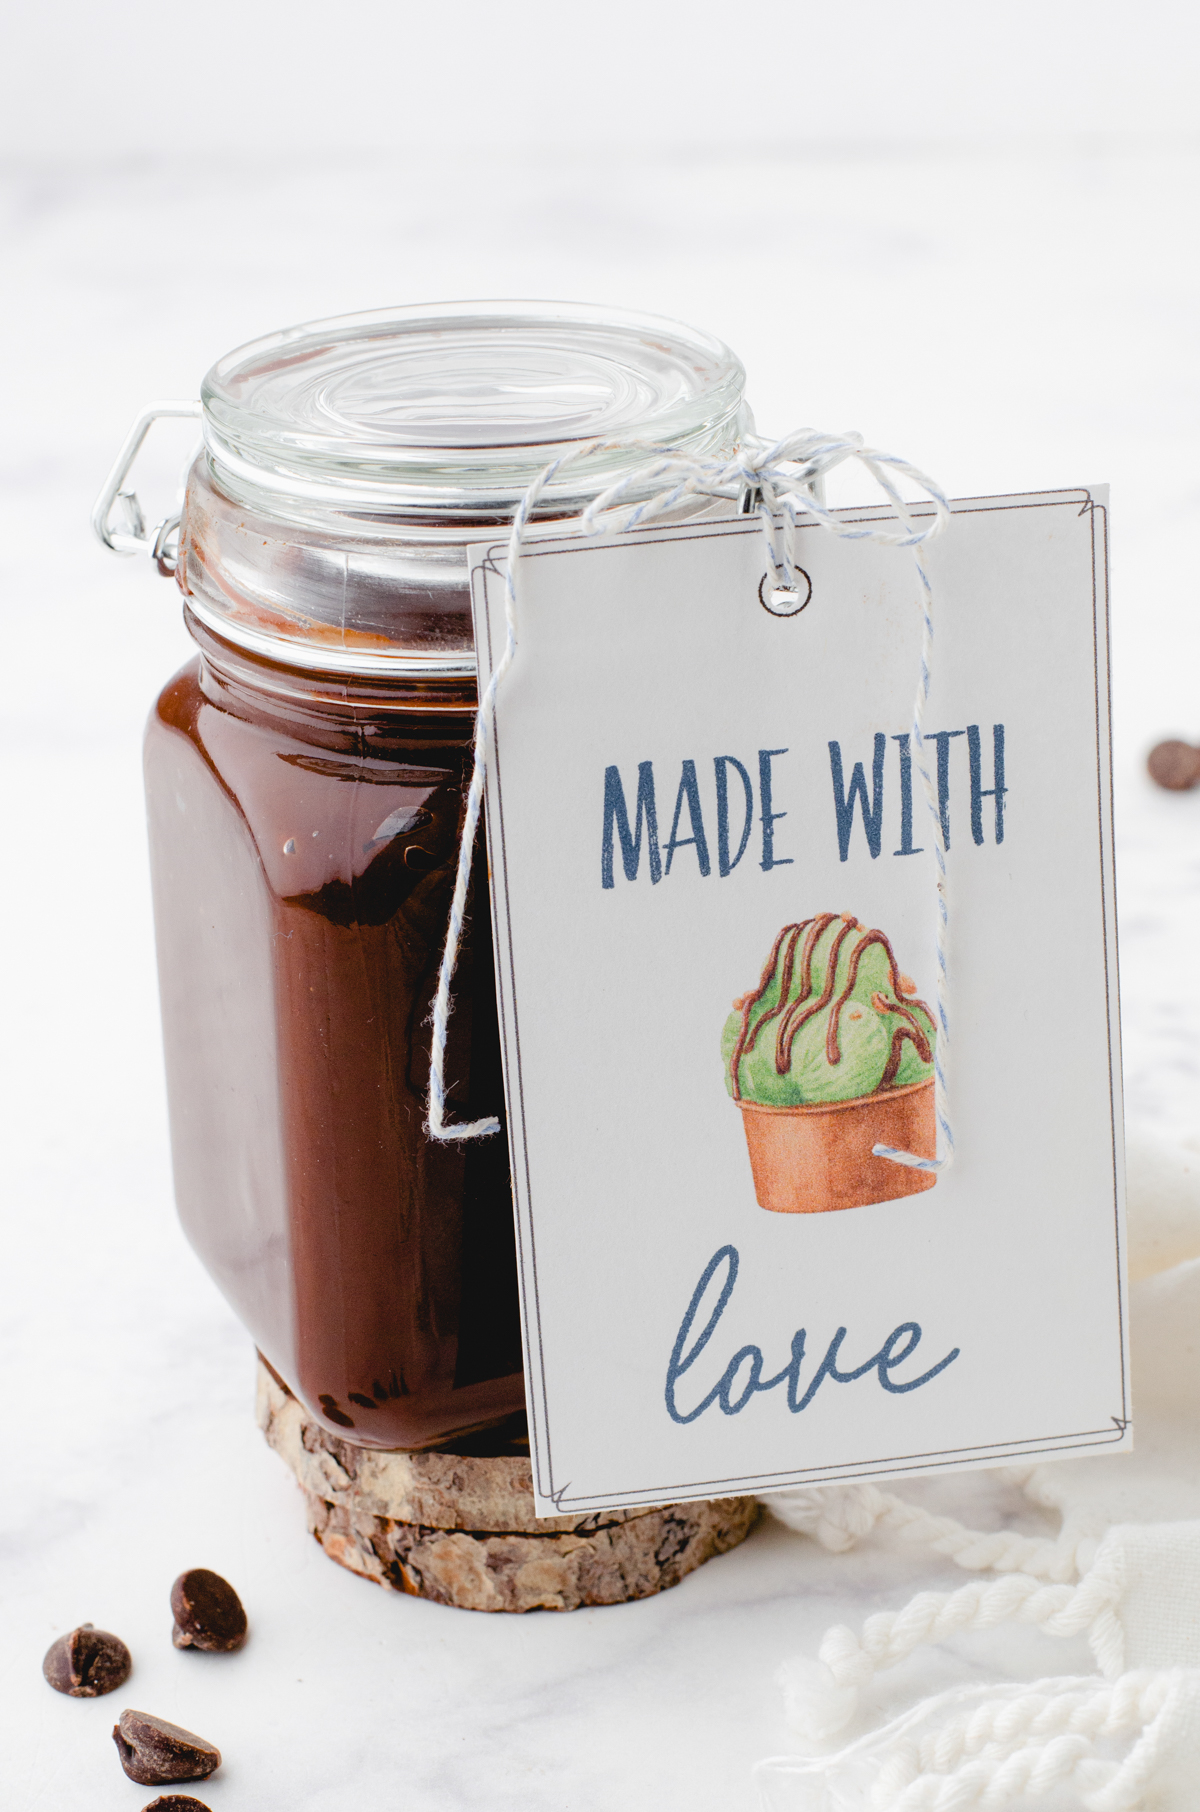 hot fudge sauce with a made with love sign attached